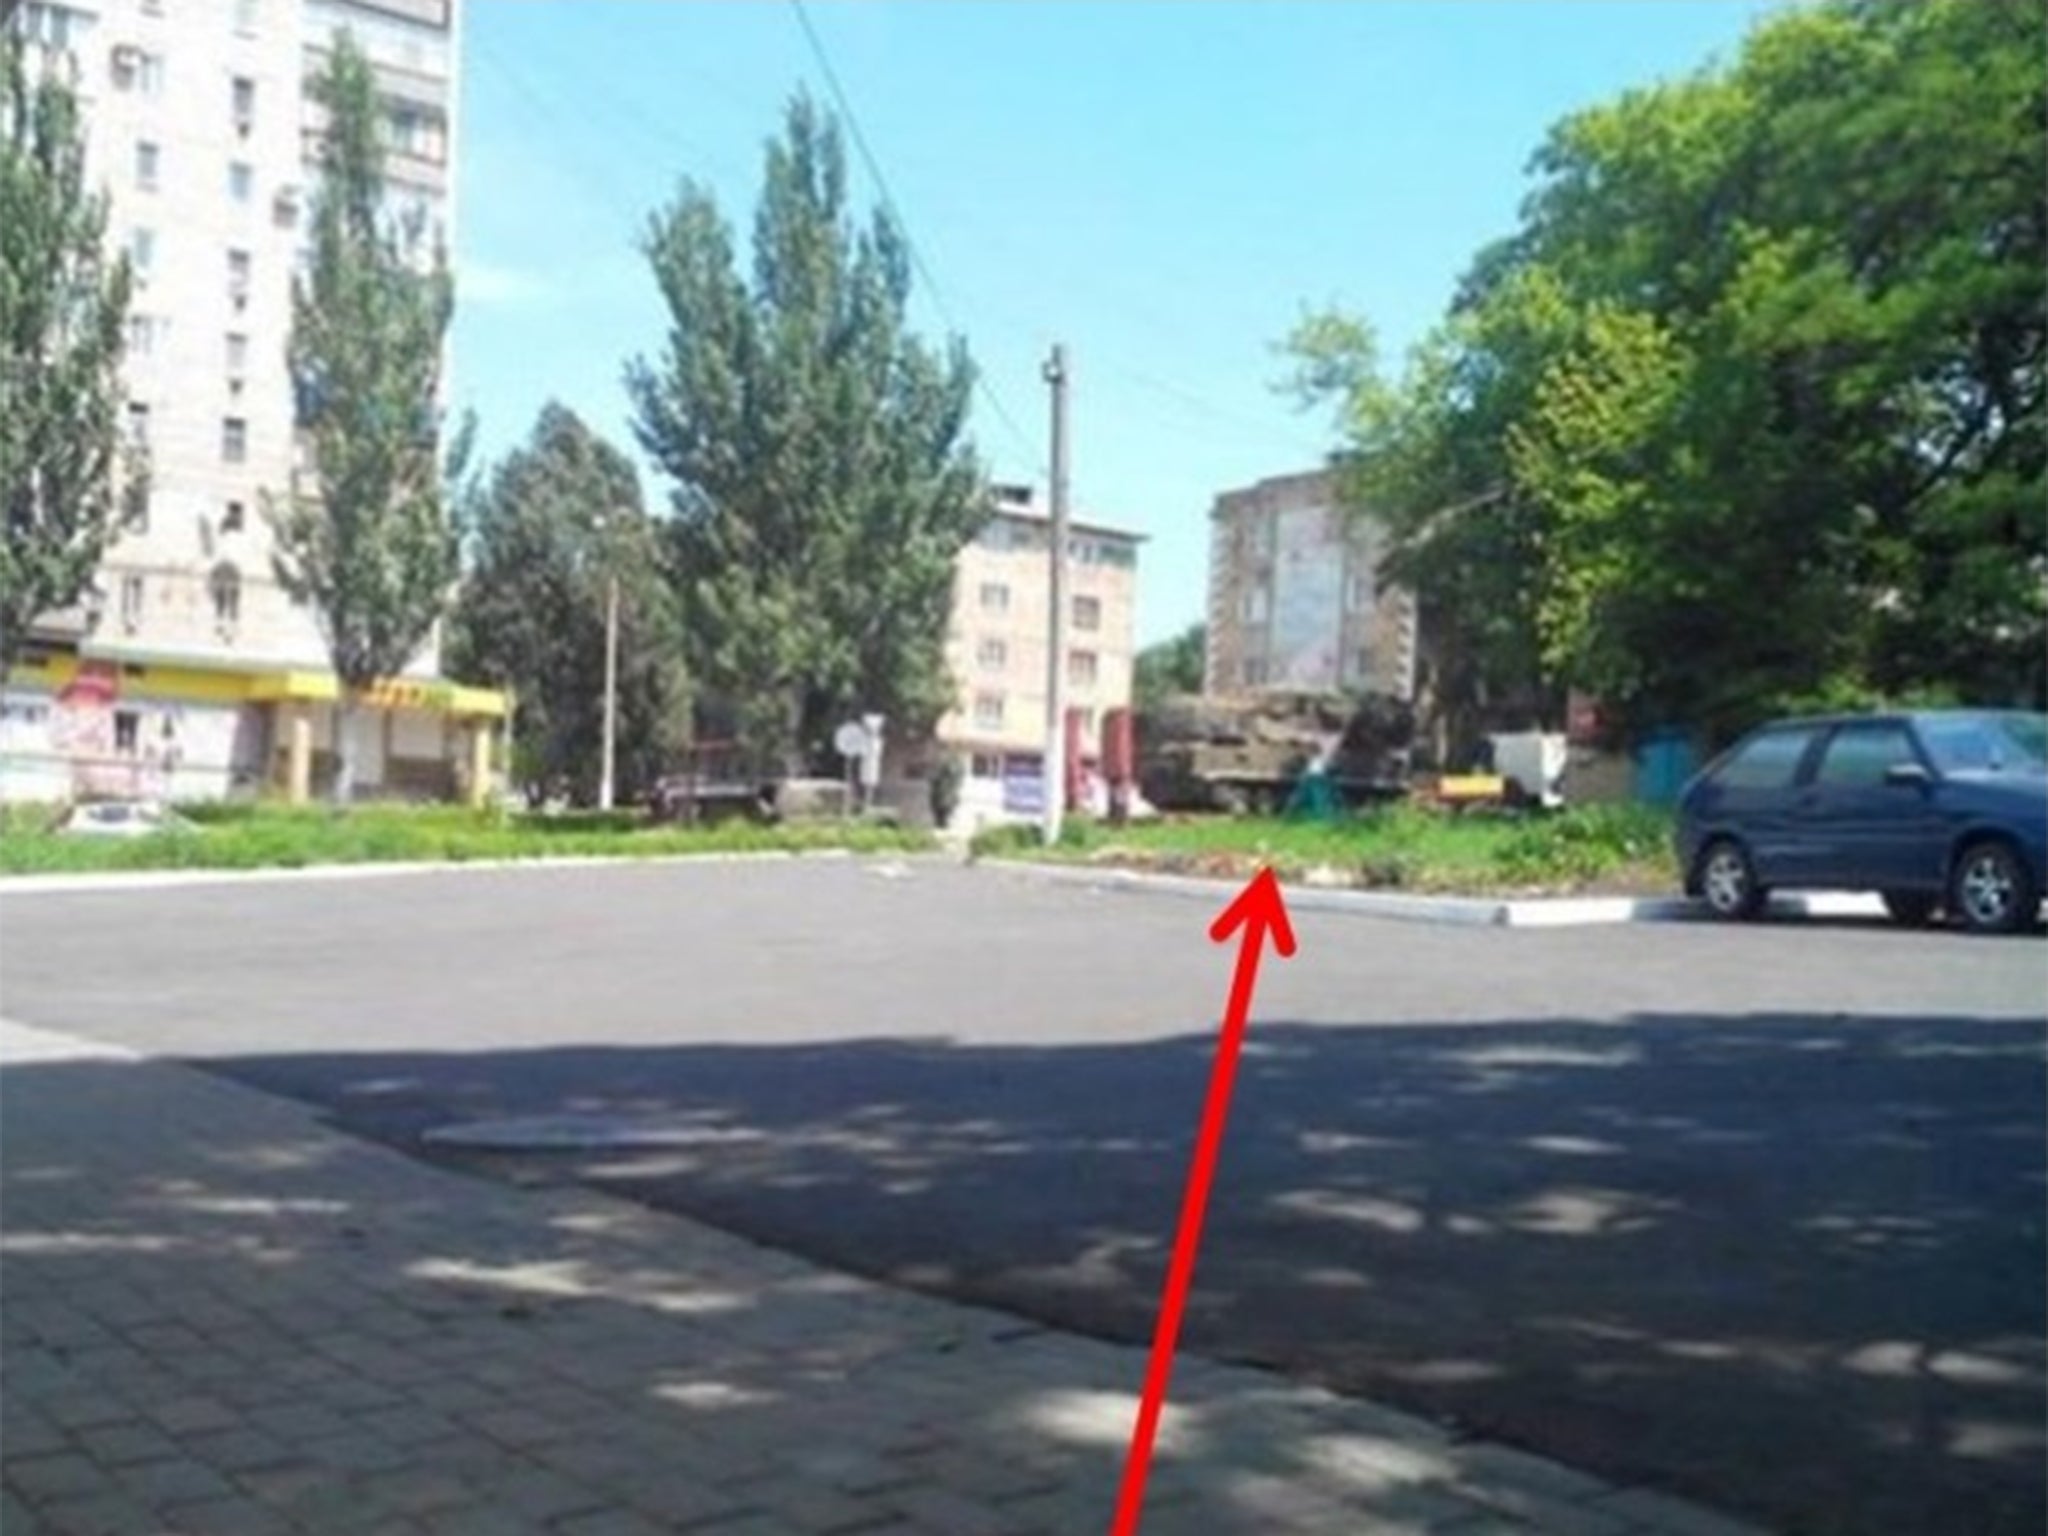 A photograph released by Ukraine’s security services claiming to prove that Russian-made BUK-M1 surface-to-air missile systems were inside the rebel-held area near the crash site